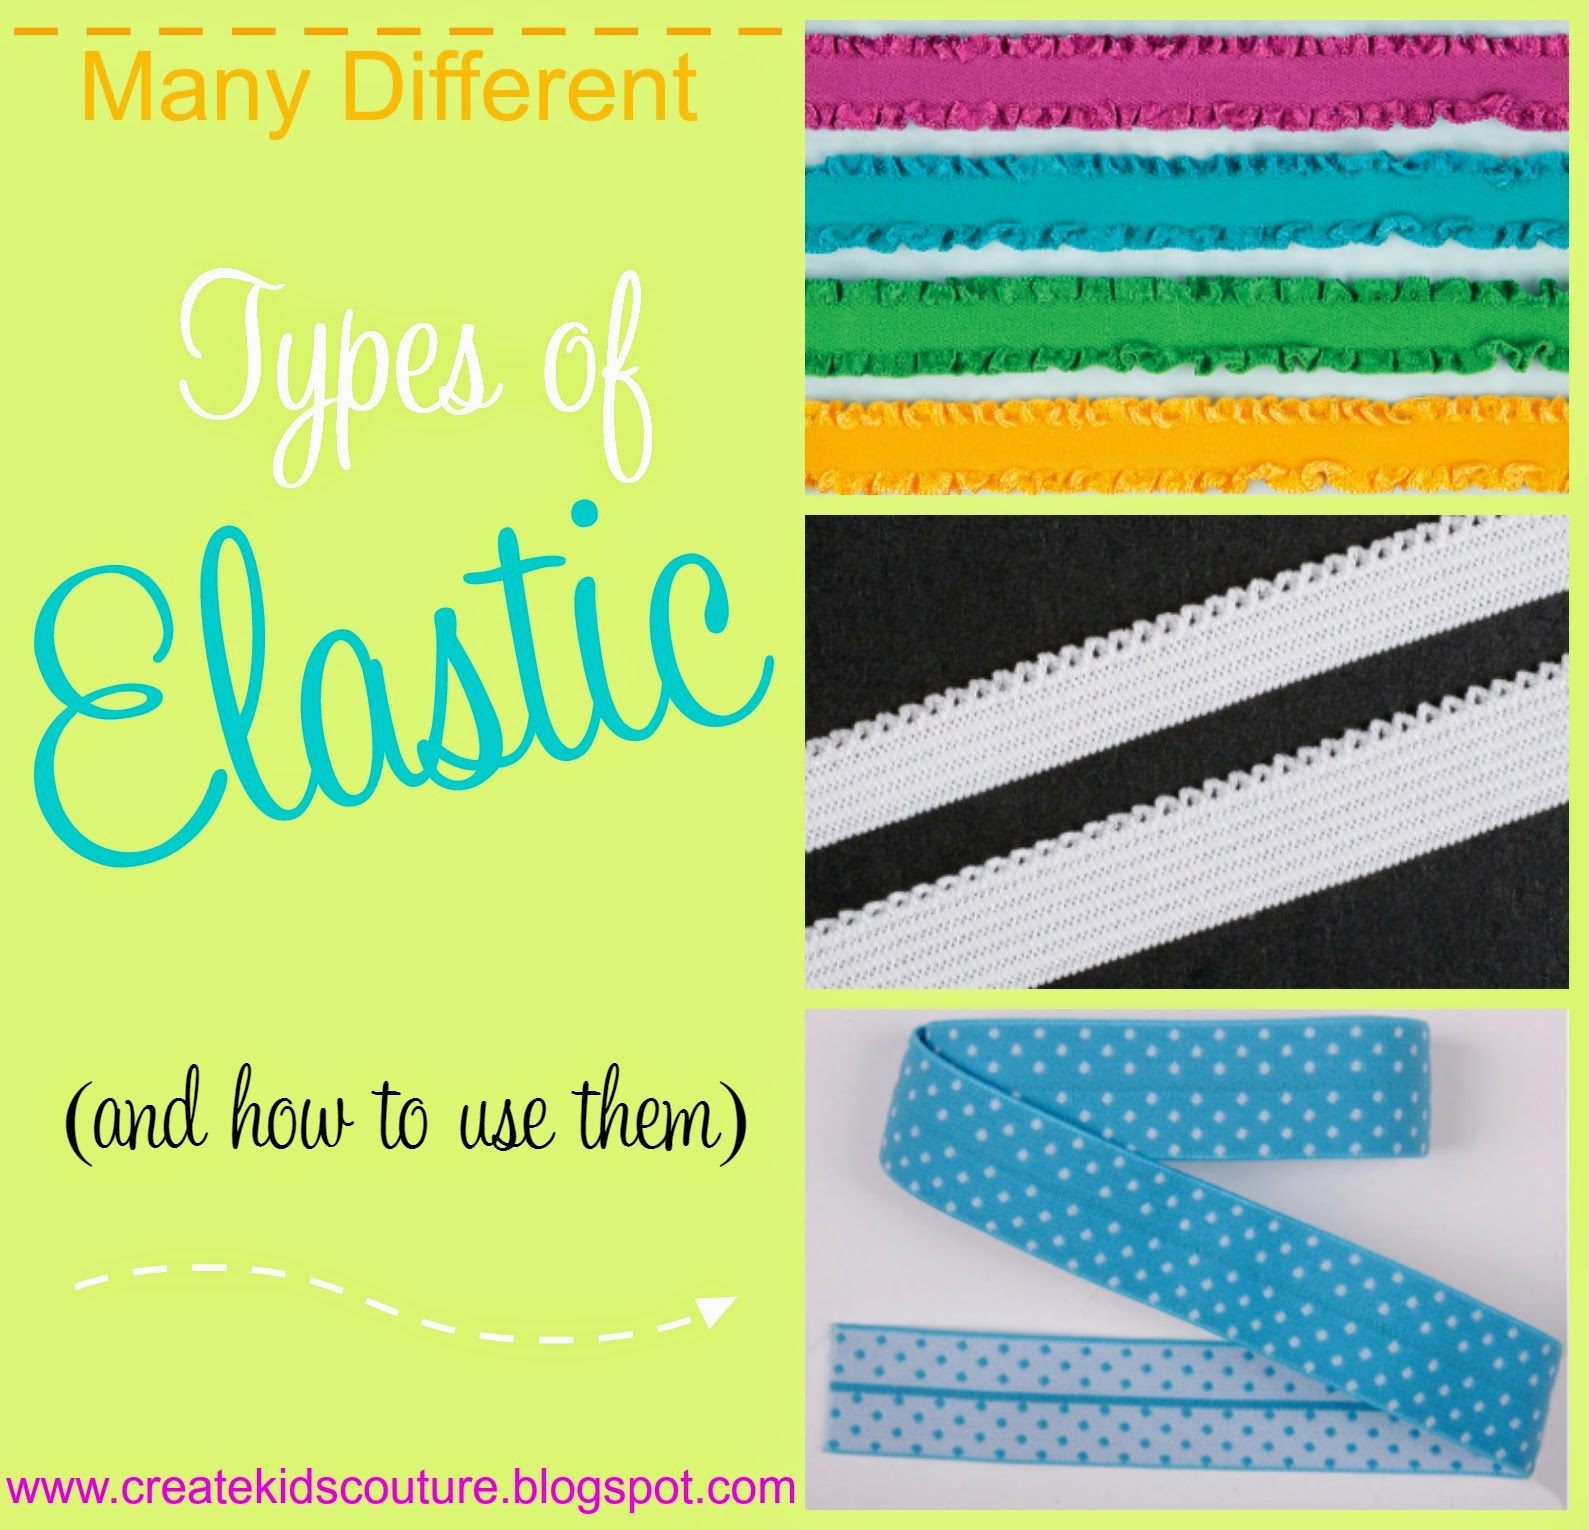 Create Kids Couture: Types of Elastic